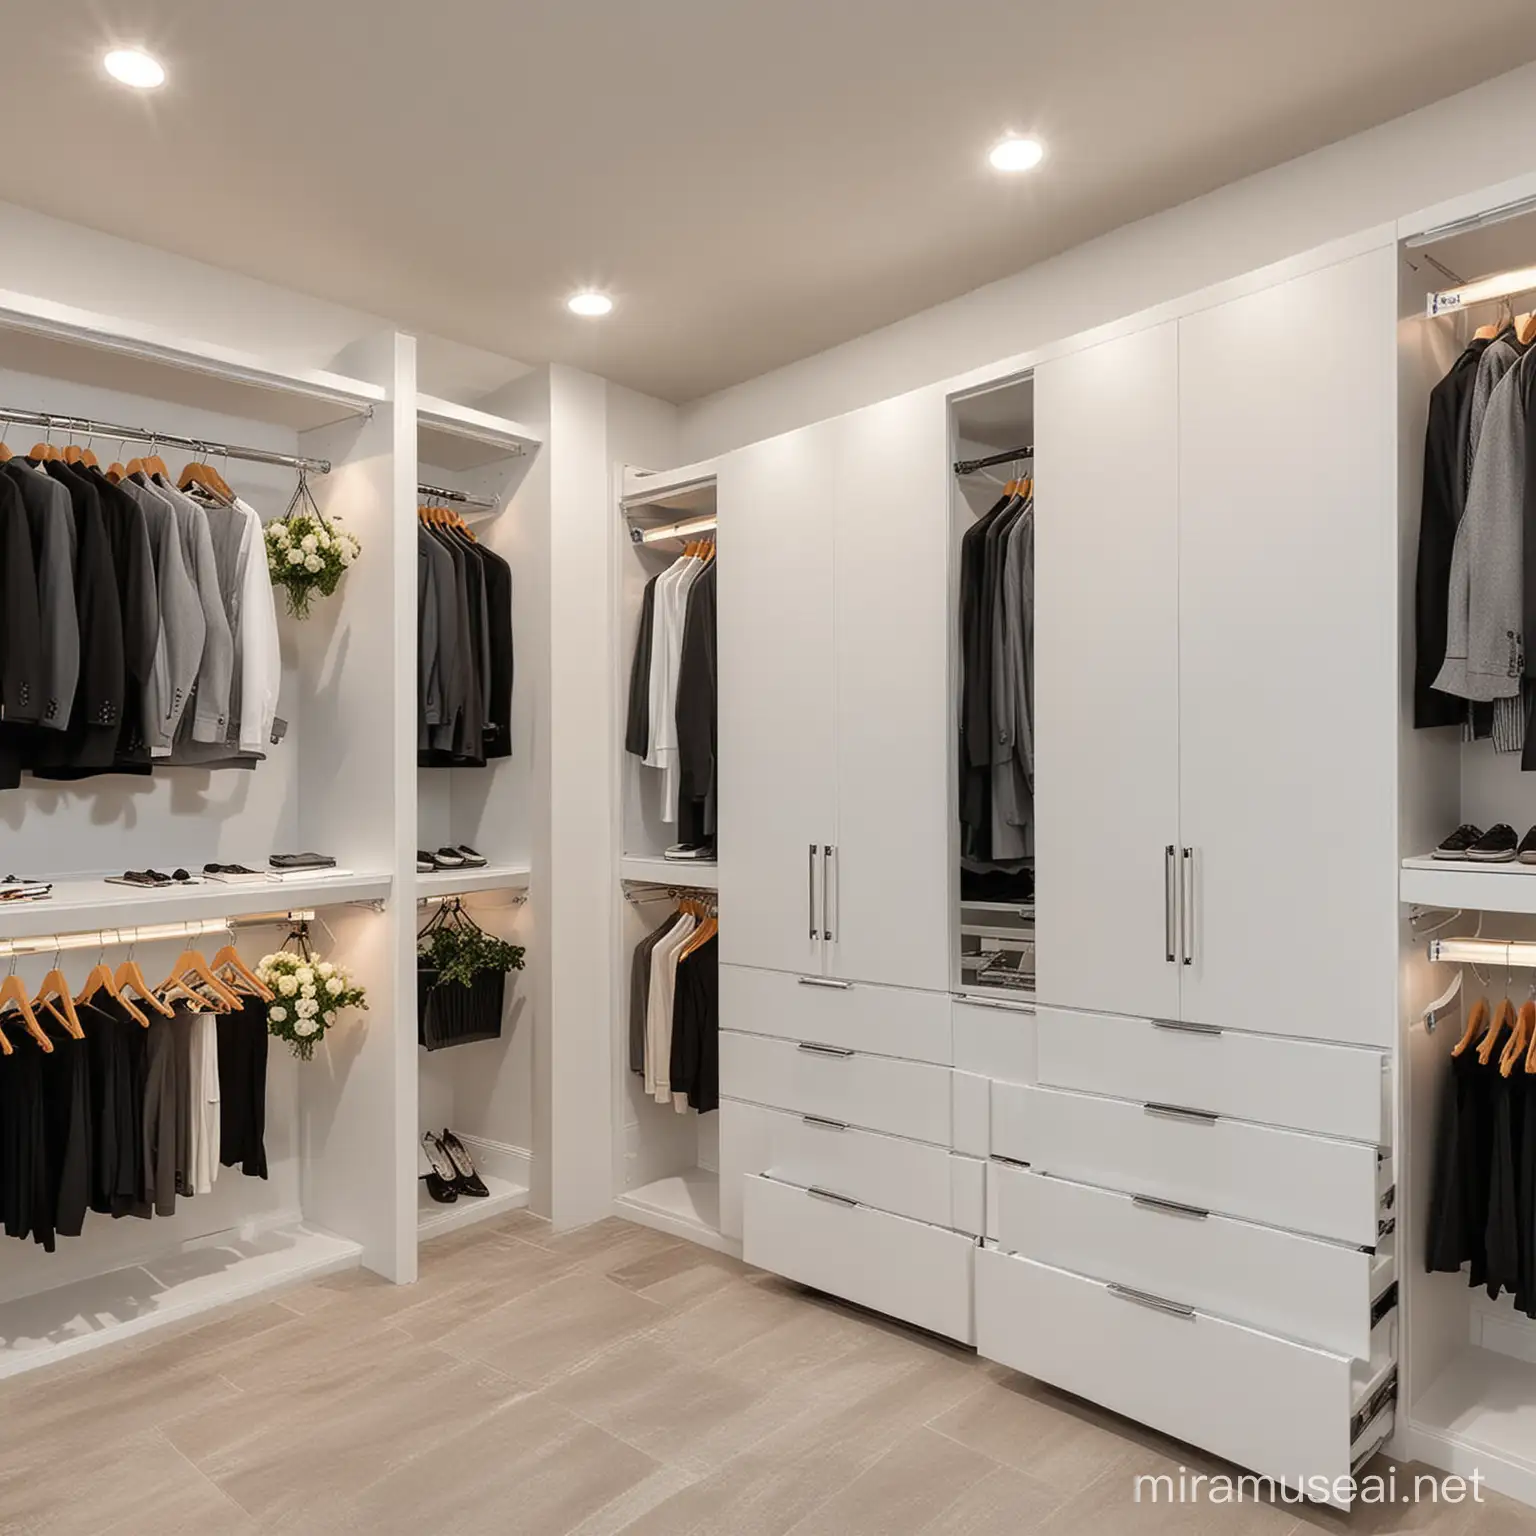 Modern Loft Style Closet with Matte White Cabinets and Professional Clothing